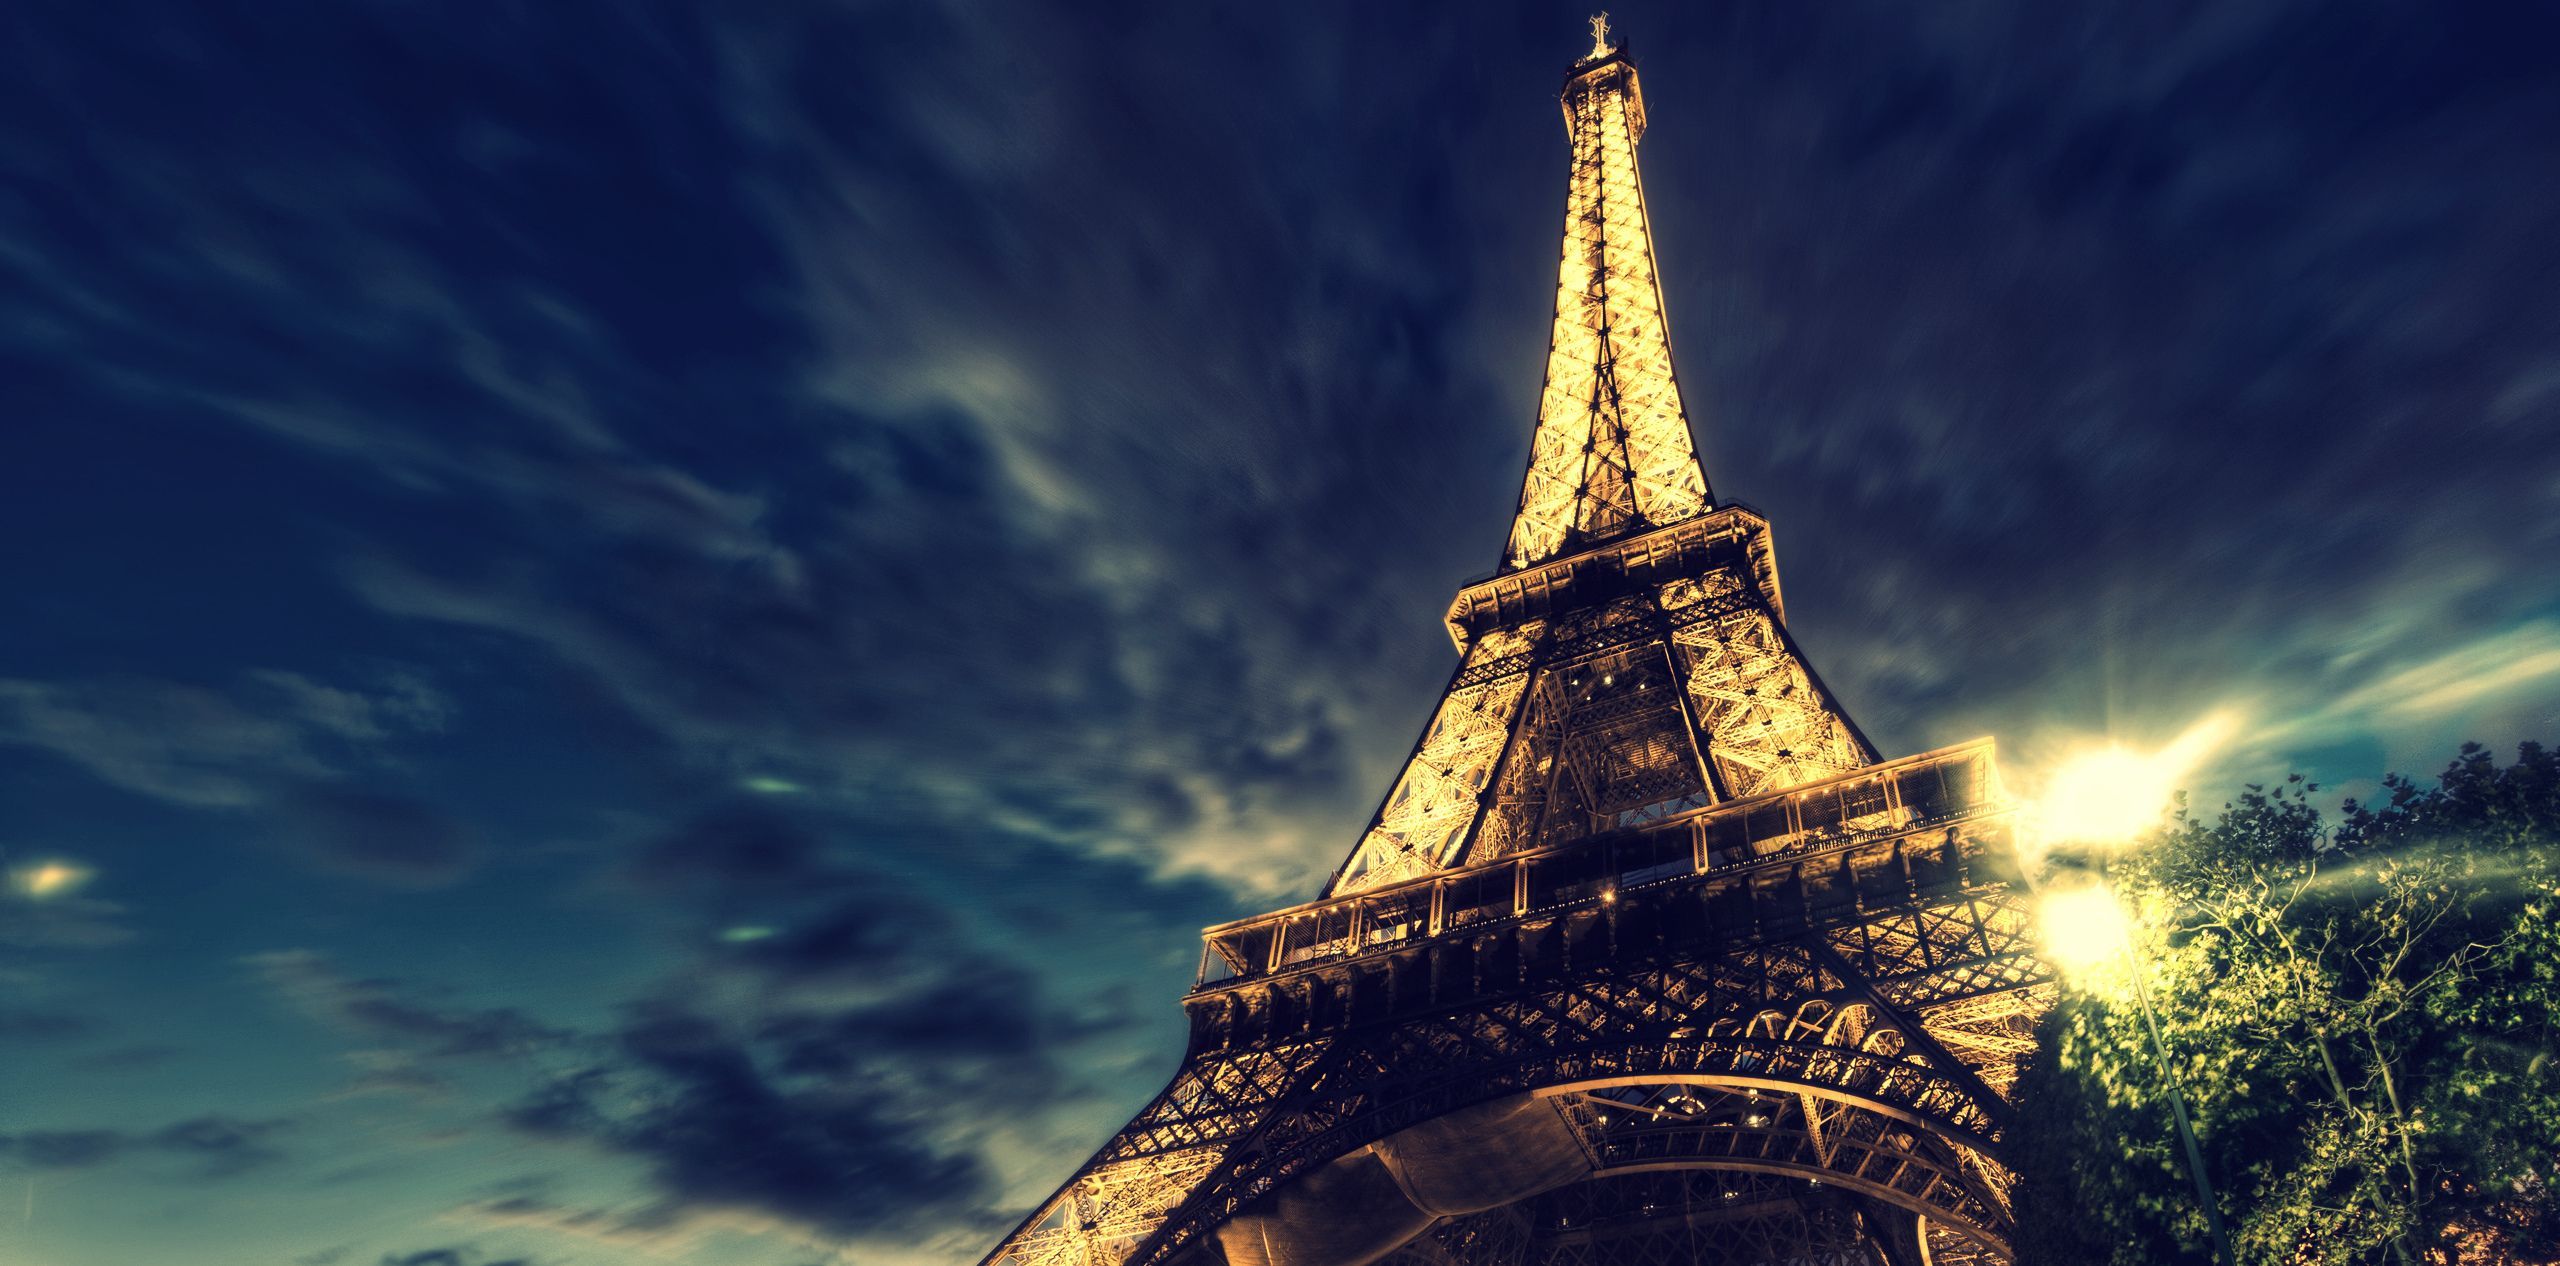 Eiffel tower on background of blue night sky wallpapers and images ...